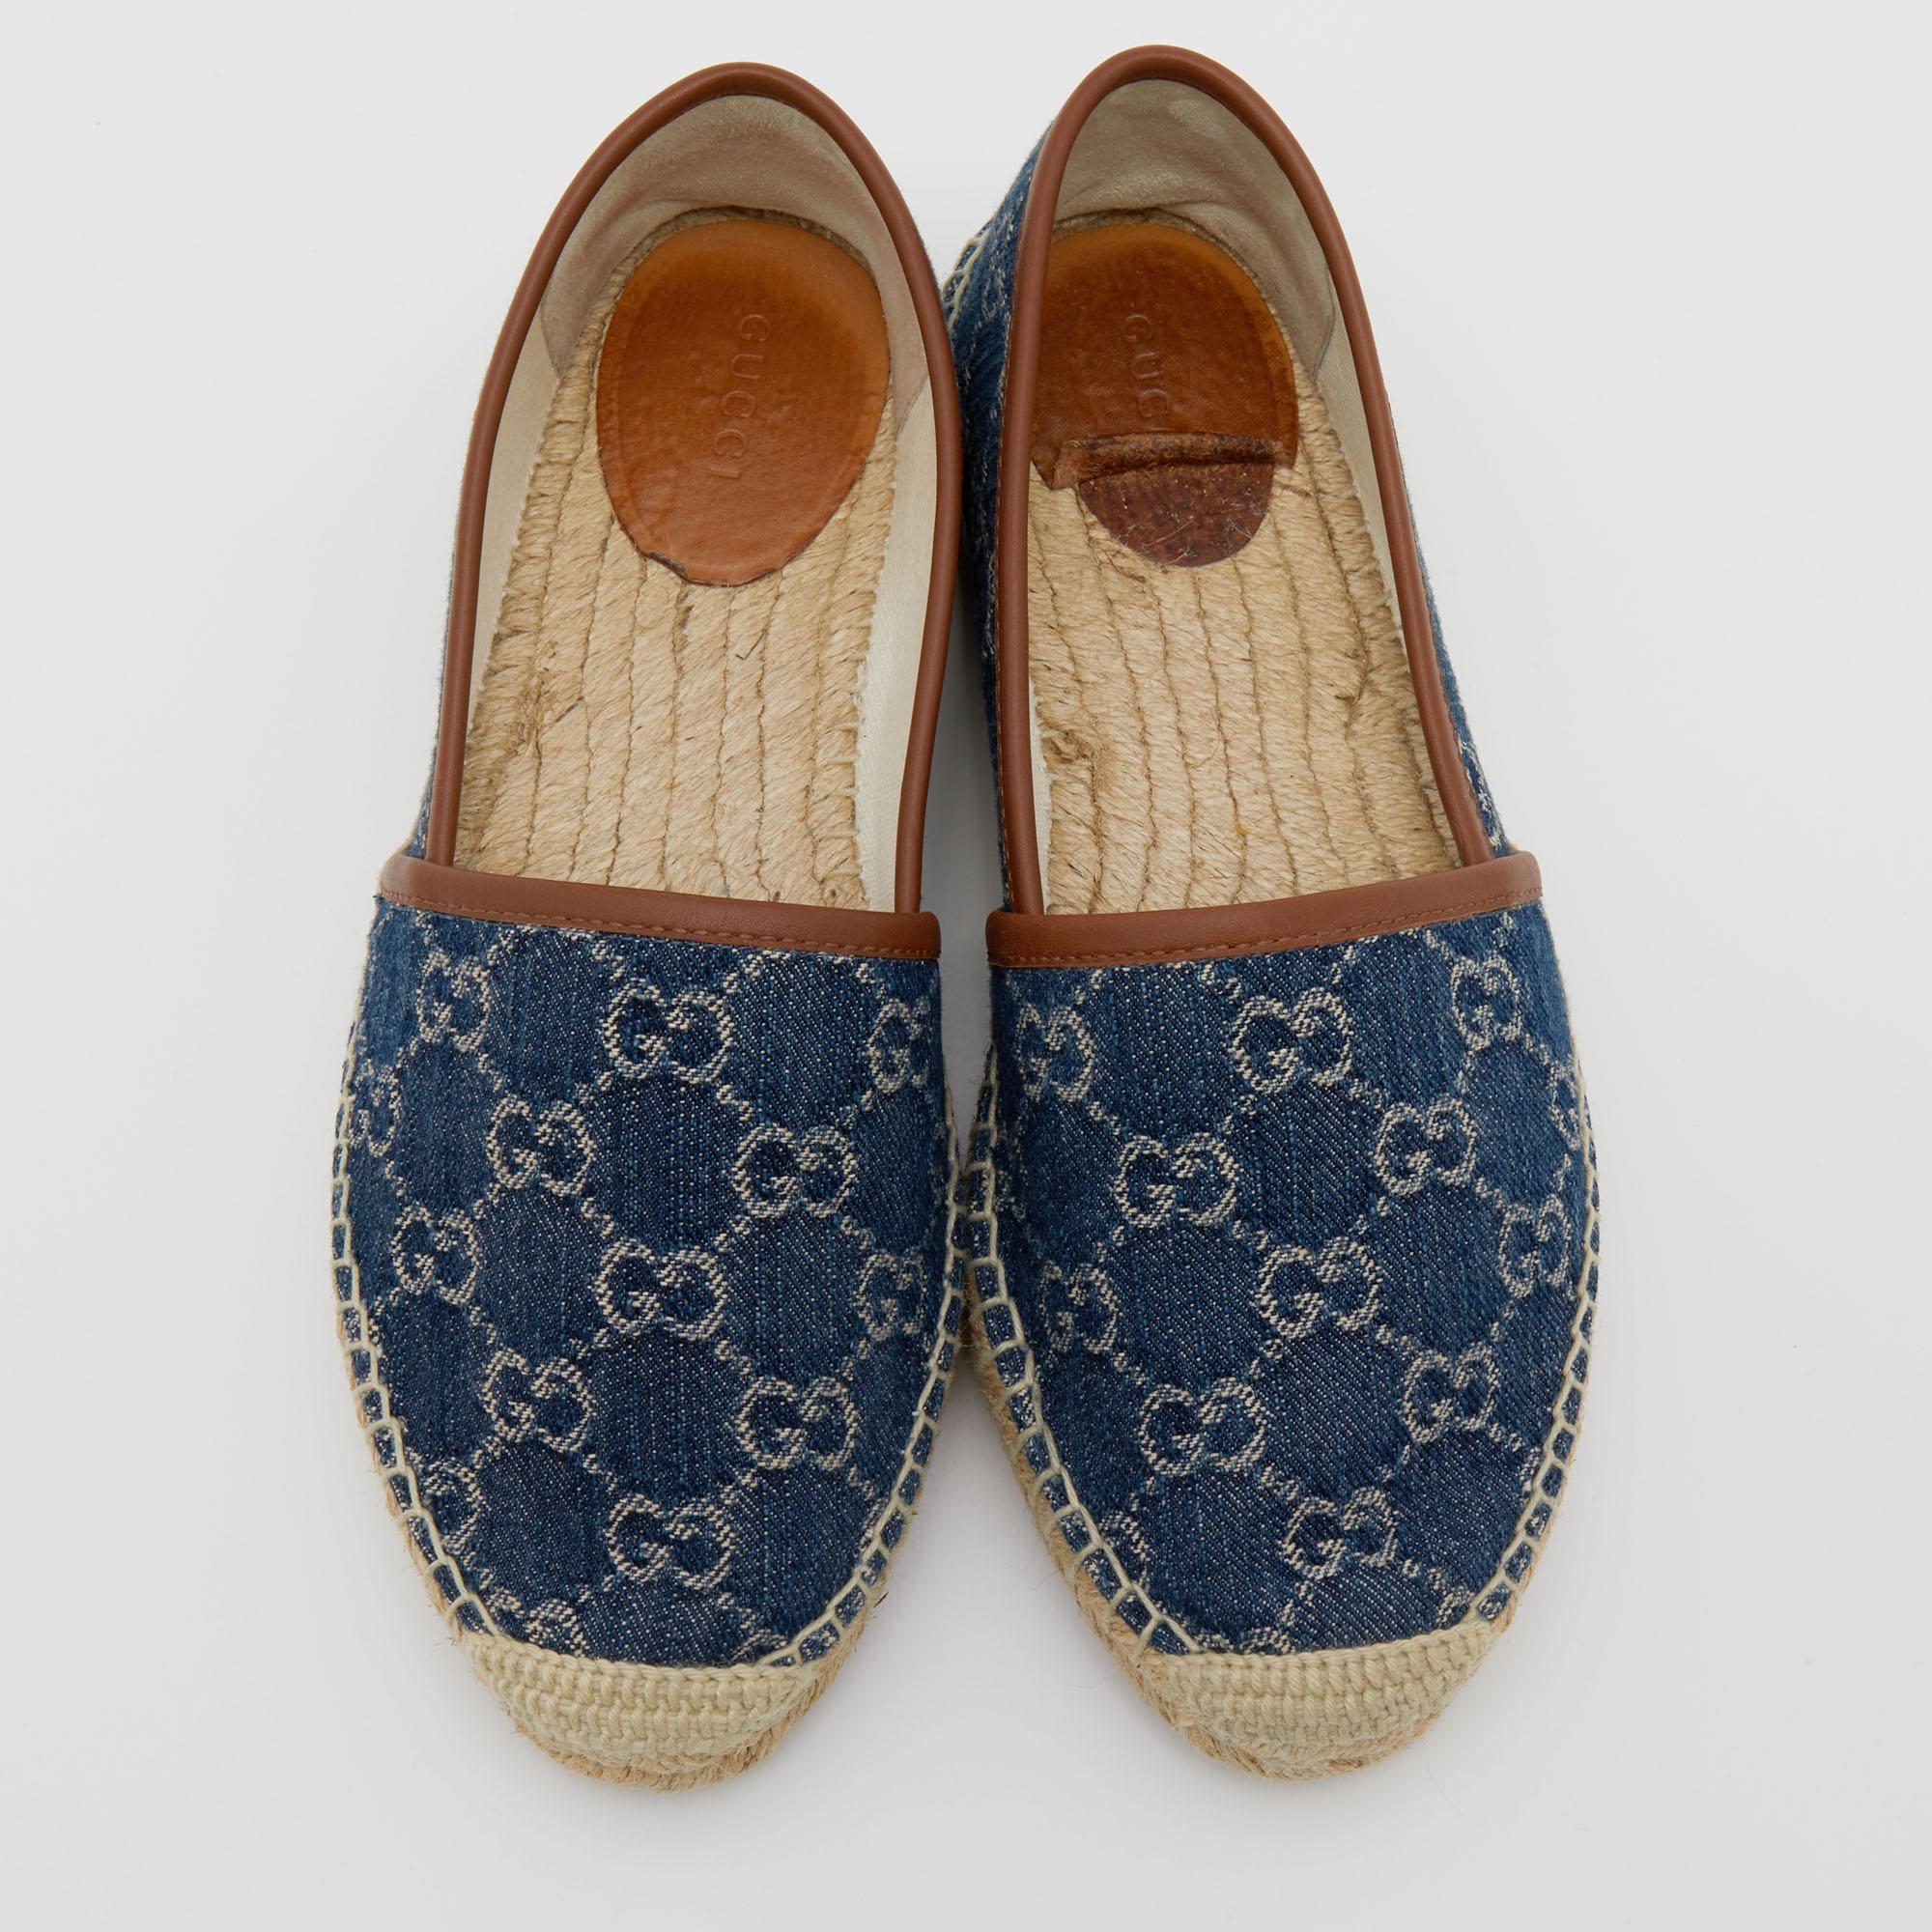 These espadrille flats in denim and leather are Gucci's interpretation of chic. Easy to slip into, this comfortable, blue-brown pair features smooth jute insoles and durable rubber soles perfect for regular use.

Includes: Original Dustbag, Original